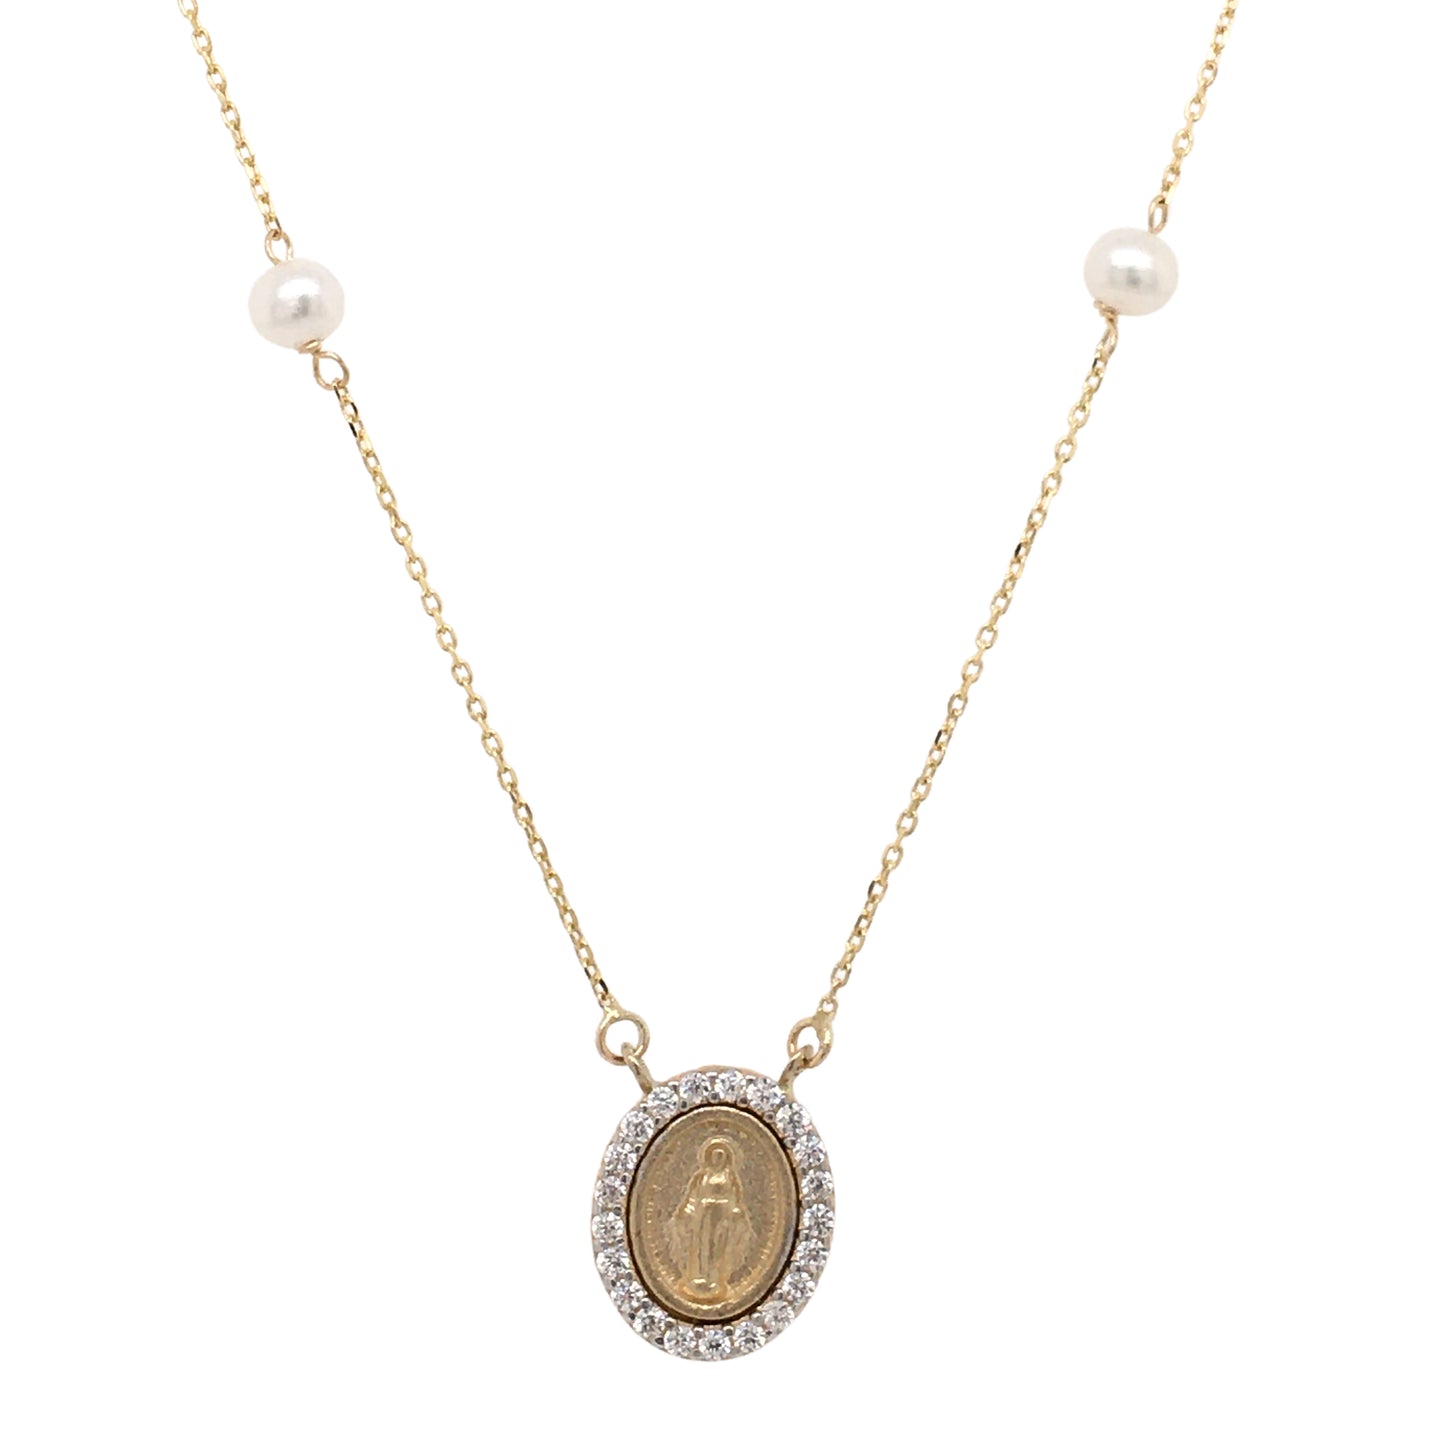 Miniature Guadalupe/Miraculous  Medal with Cubic Zirconia Frame on Pearl Necklace